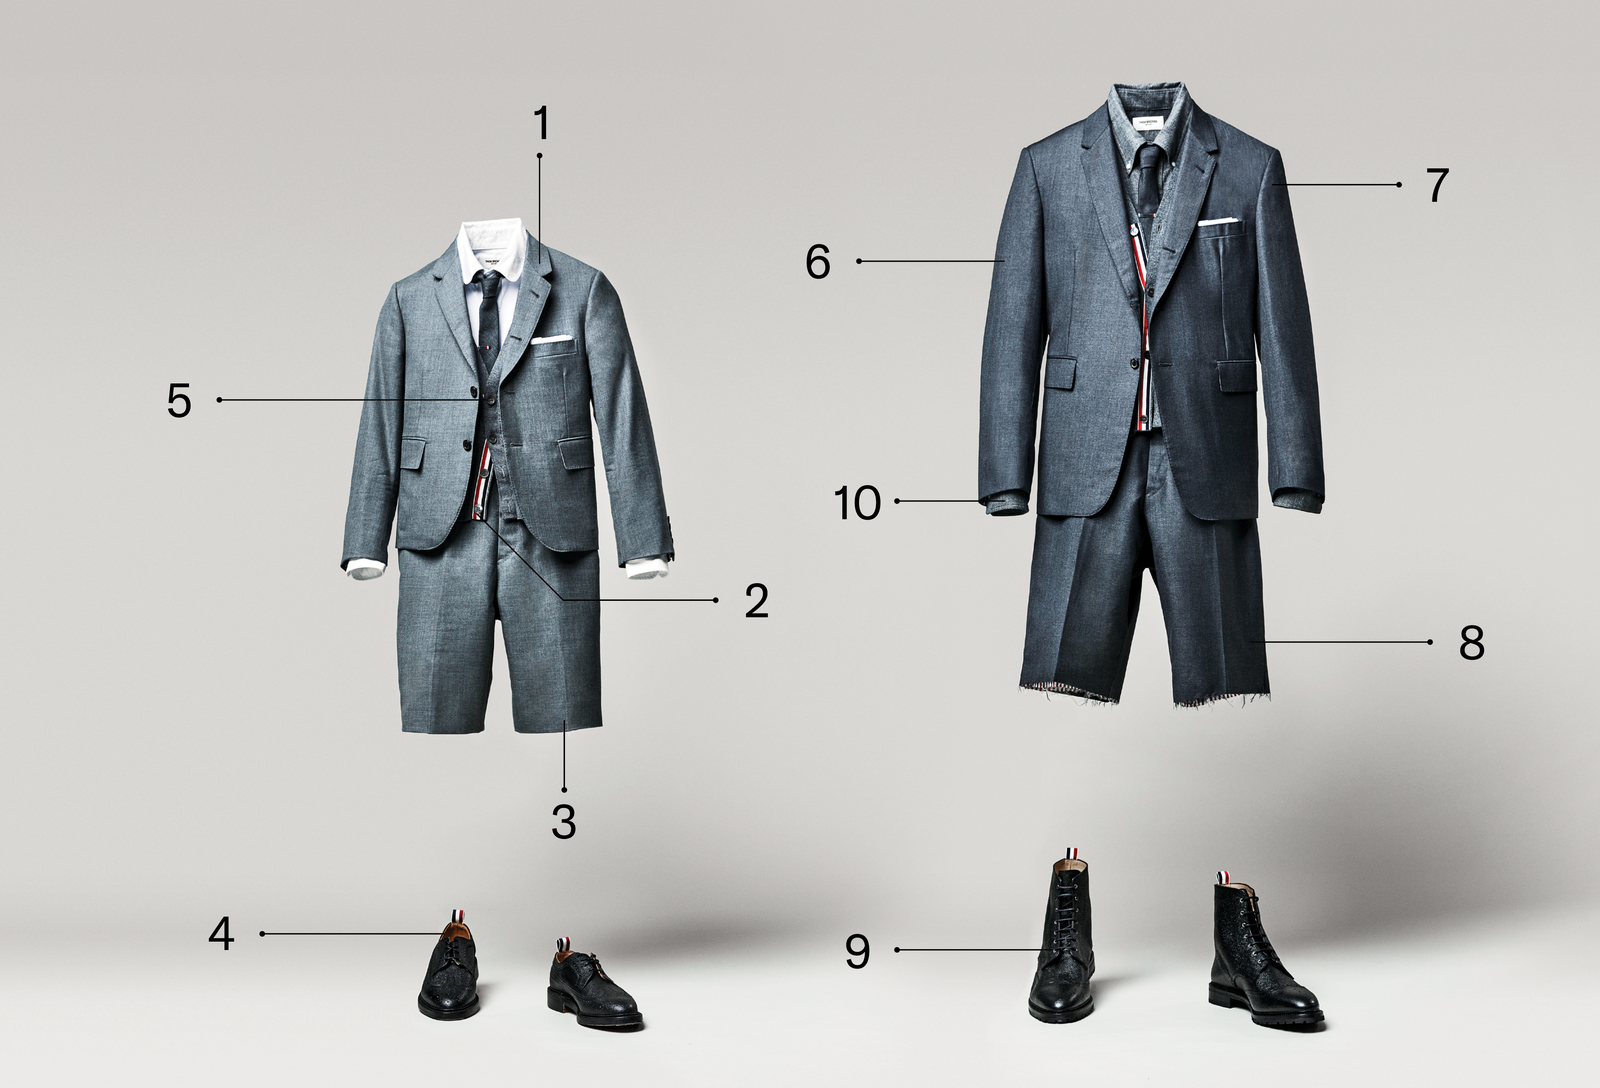 gq outfit breakdown with callouts